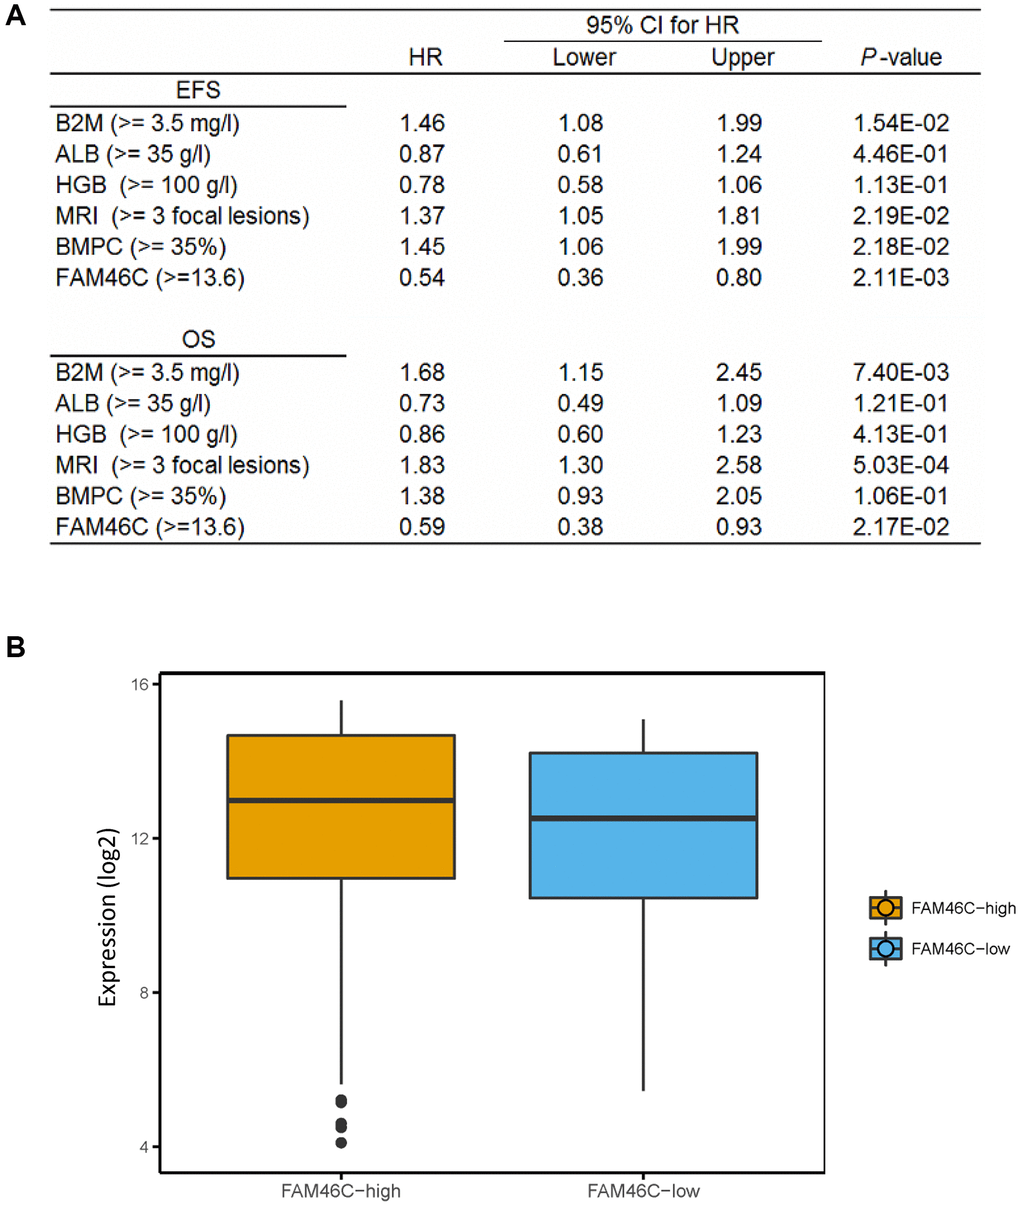 The expression of FAM46C is an independent prognostic factor in multiple myeloma. (A) Cox regression analysis identified FAM46C expression (cut off FAM46C ≥ 13.6) as an independent prognostic factor in 559 multiple myeloma patients. OS, overall survival; EPS, progress free survival. Abbreviations: β2-MG: β2 microglobulin; ALB: serum albumin; HR: hazard ratio; CI: confidence interval. (B) Lower transcriptome expression level in FAM46C-low group compared with FAM46C-high group in 559 multiple myeloma patients. P = 0.0043, unpaired t test, two sided (cut off FAM46C ≥ 13.6).